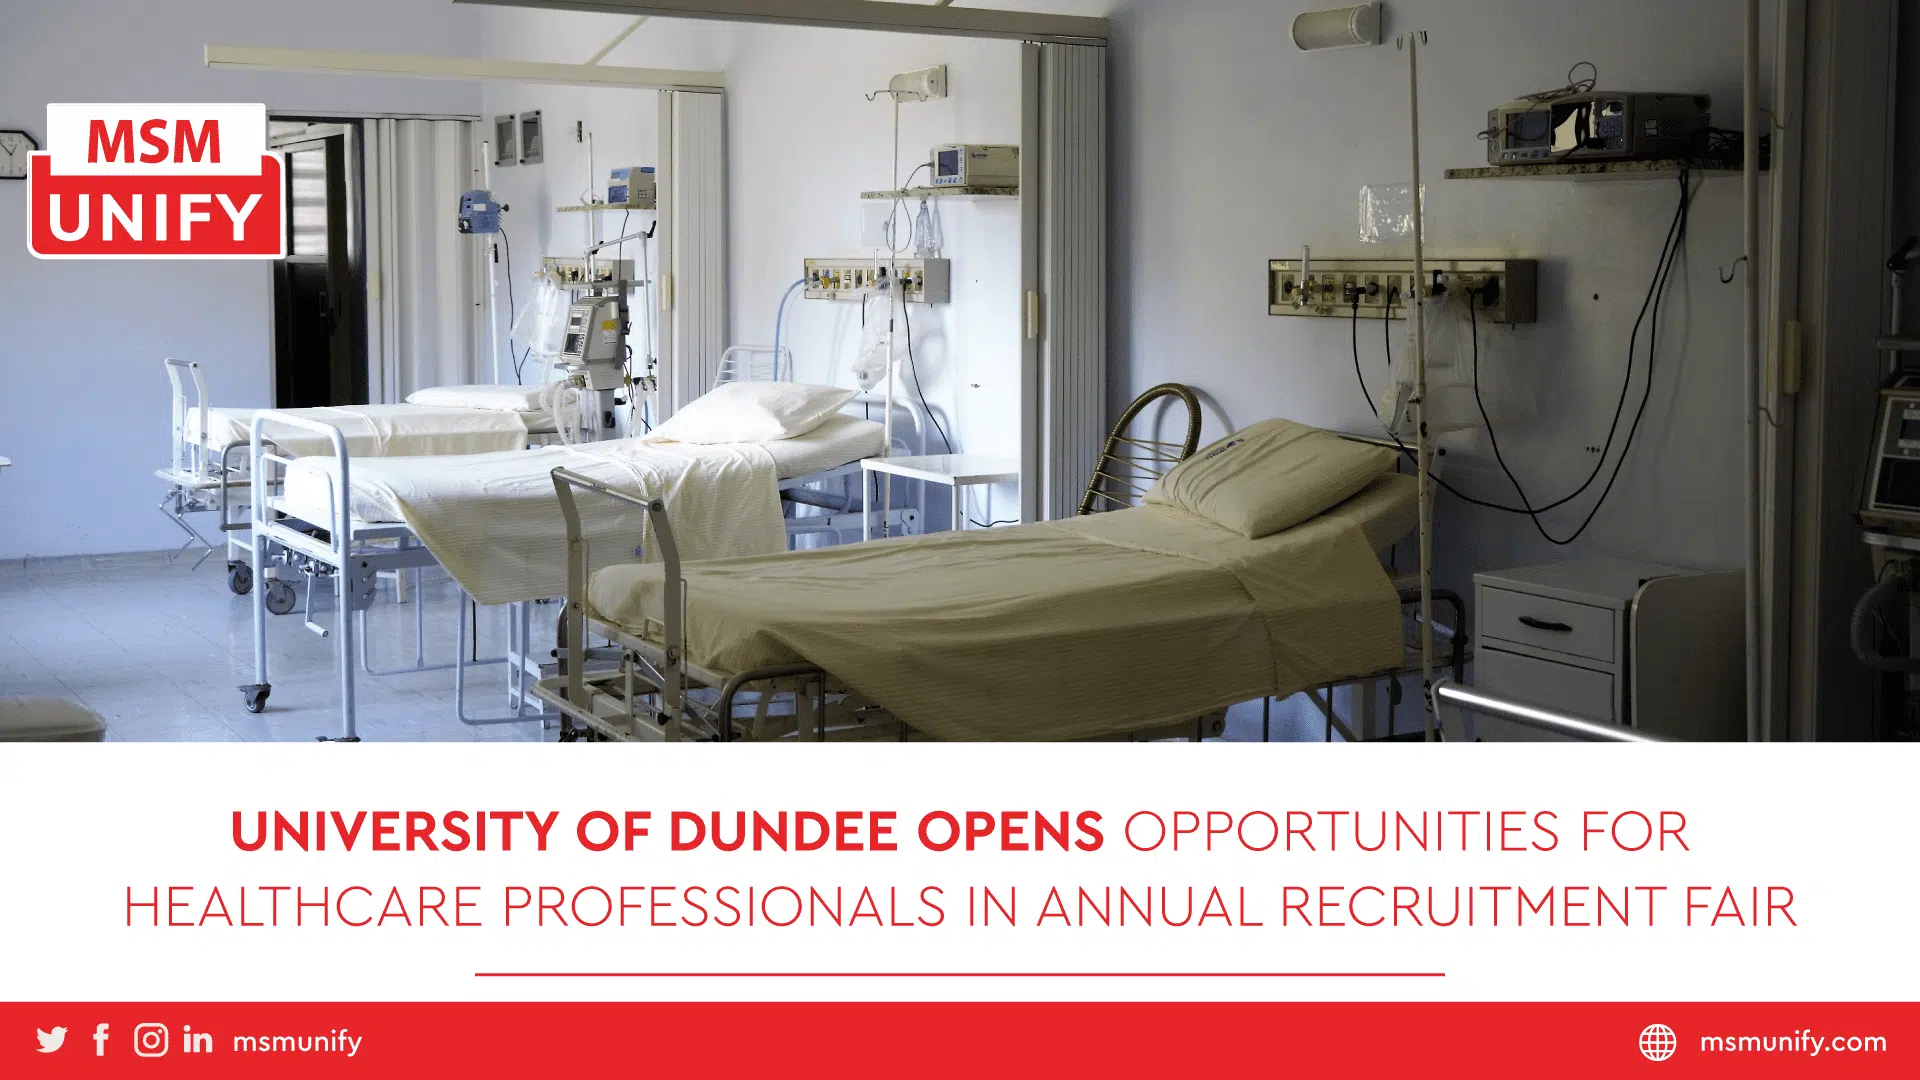 University of Dundee Opens Opportunities for Healthcare Professionals in Annual Recruitment Fair